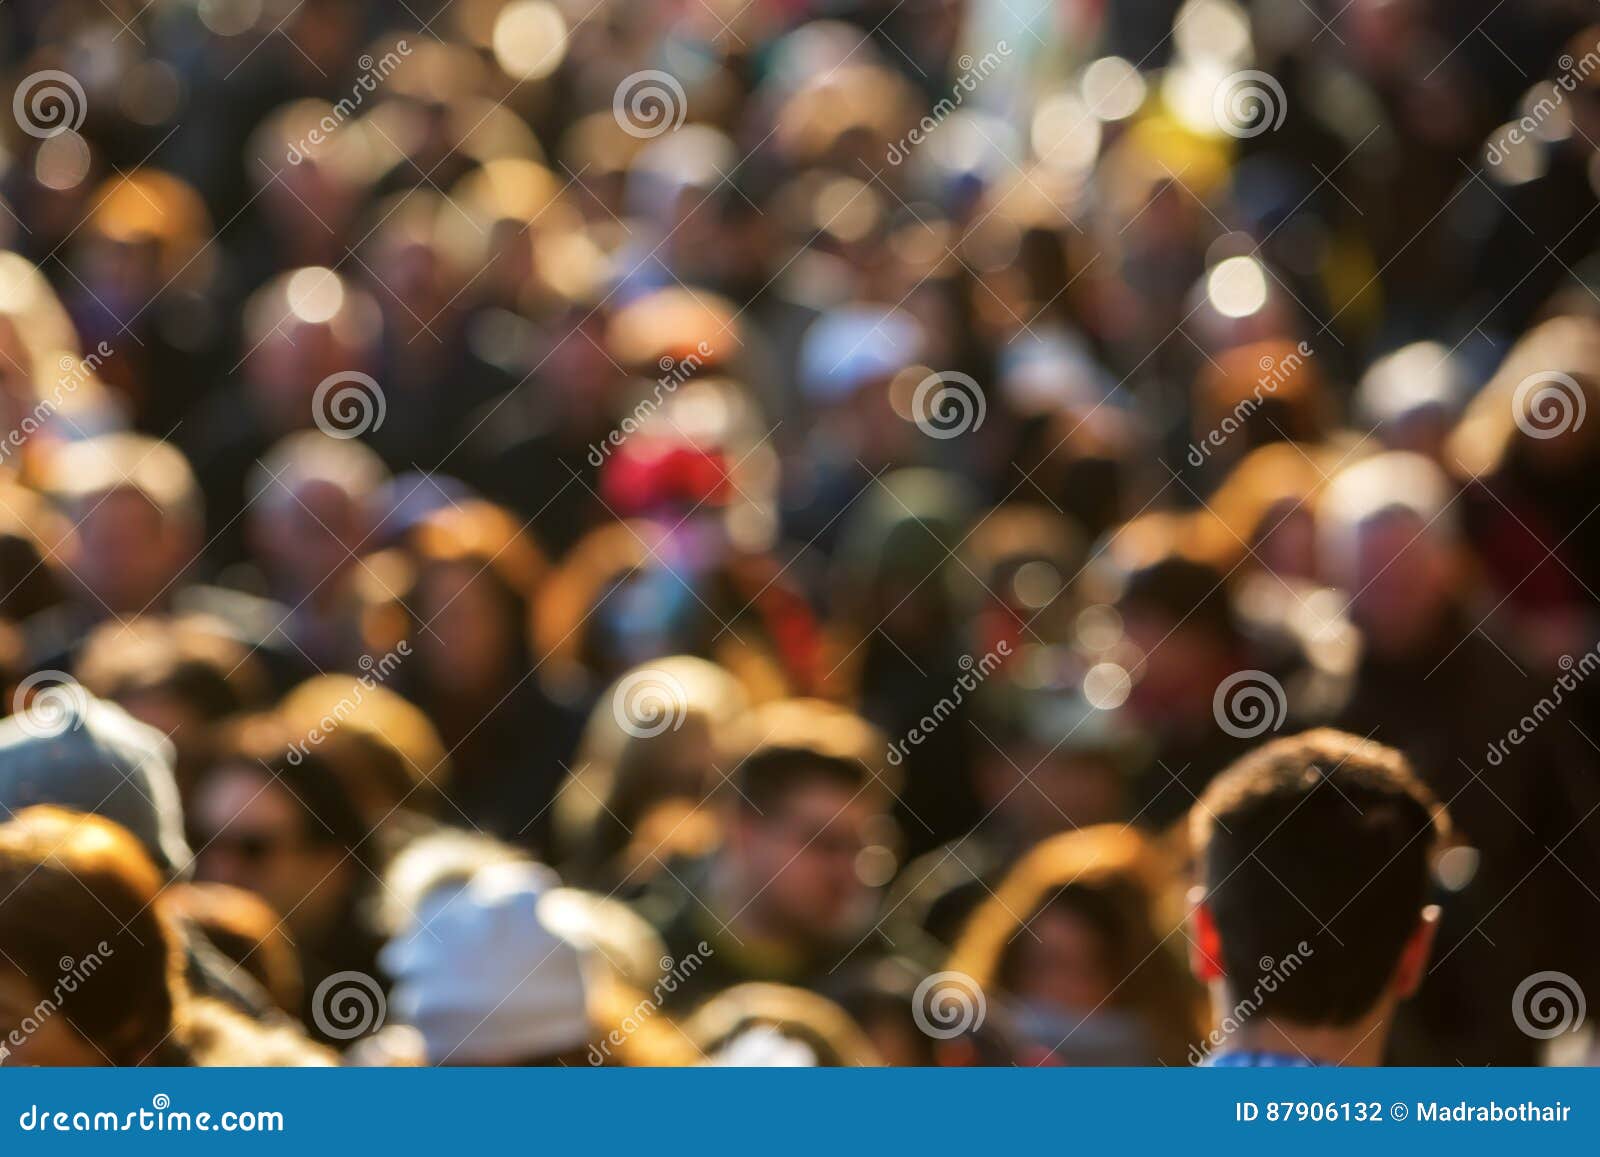 top view of a crowd of people out of focus